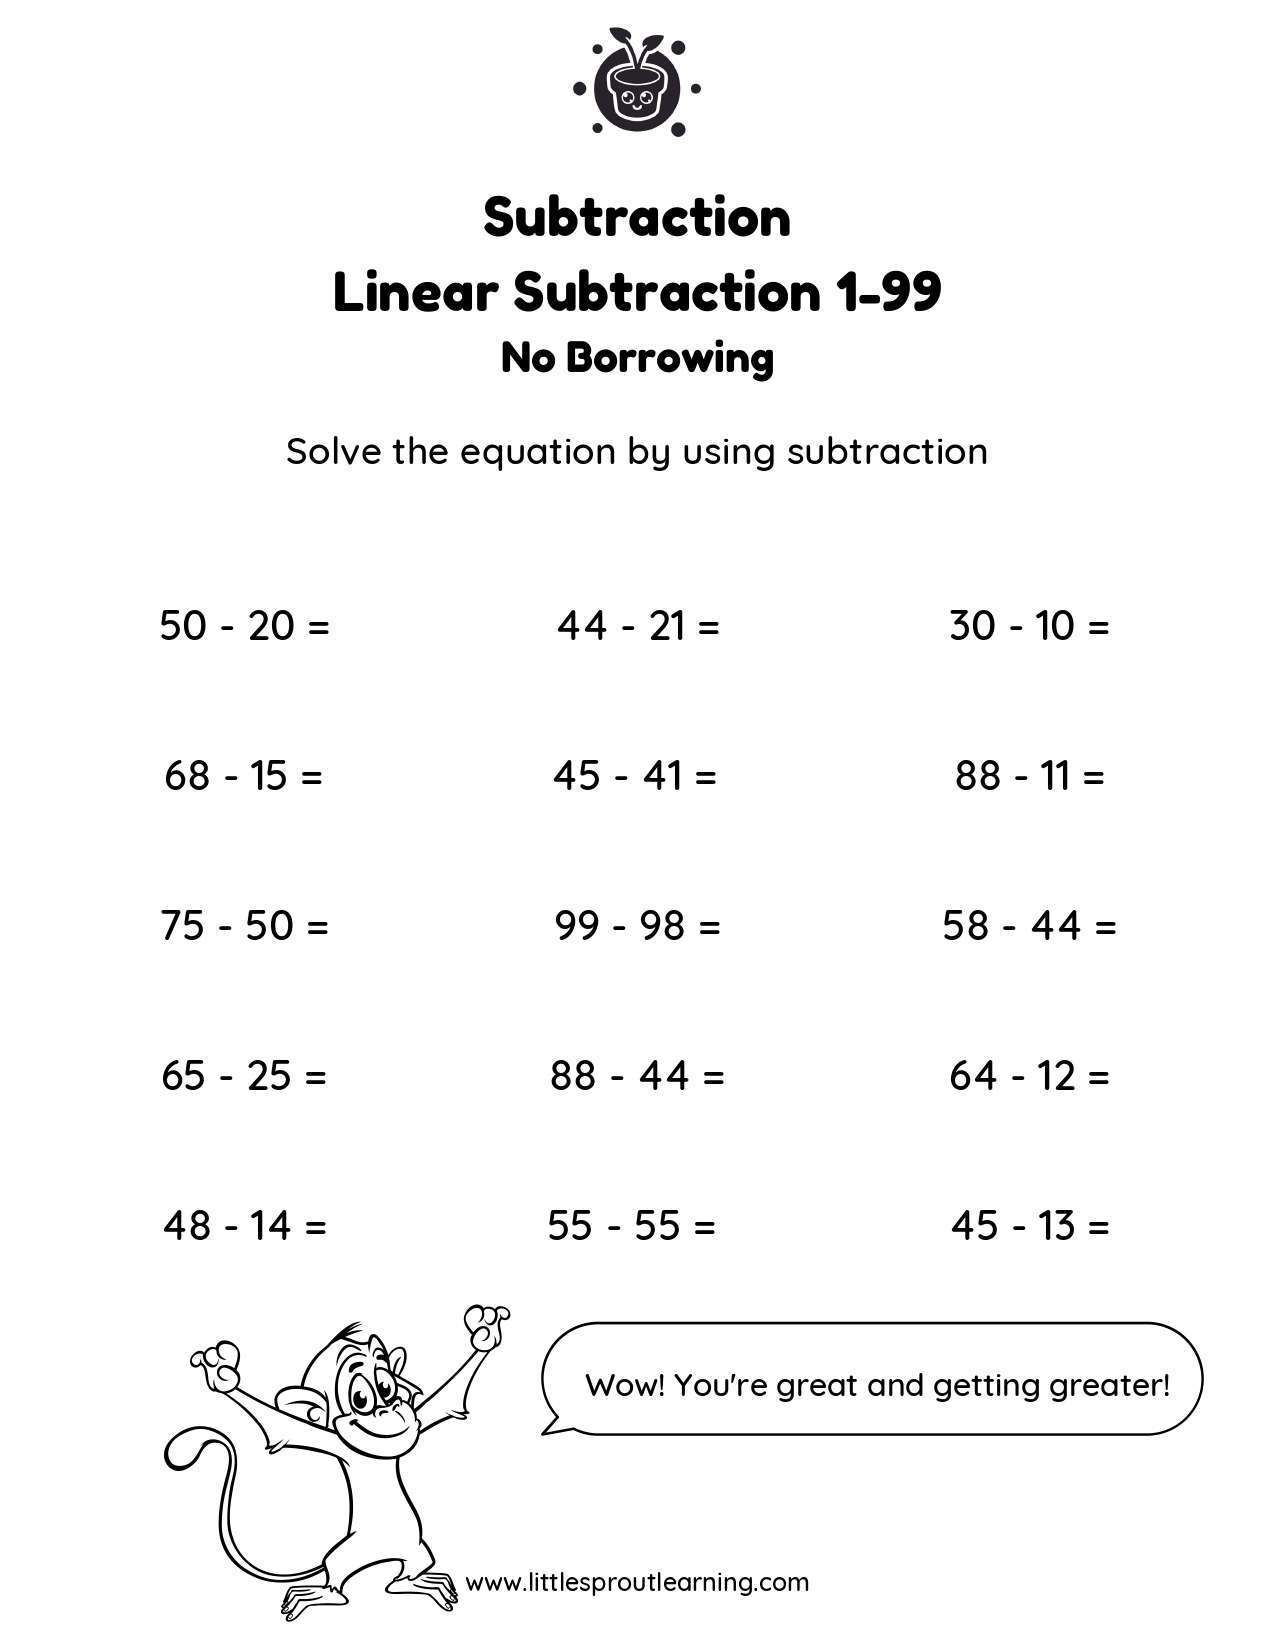 Grade 1 Subtraction Worksheet Linear 2 Digits No Borrowing page 0001